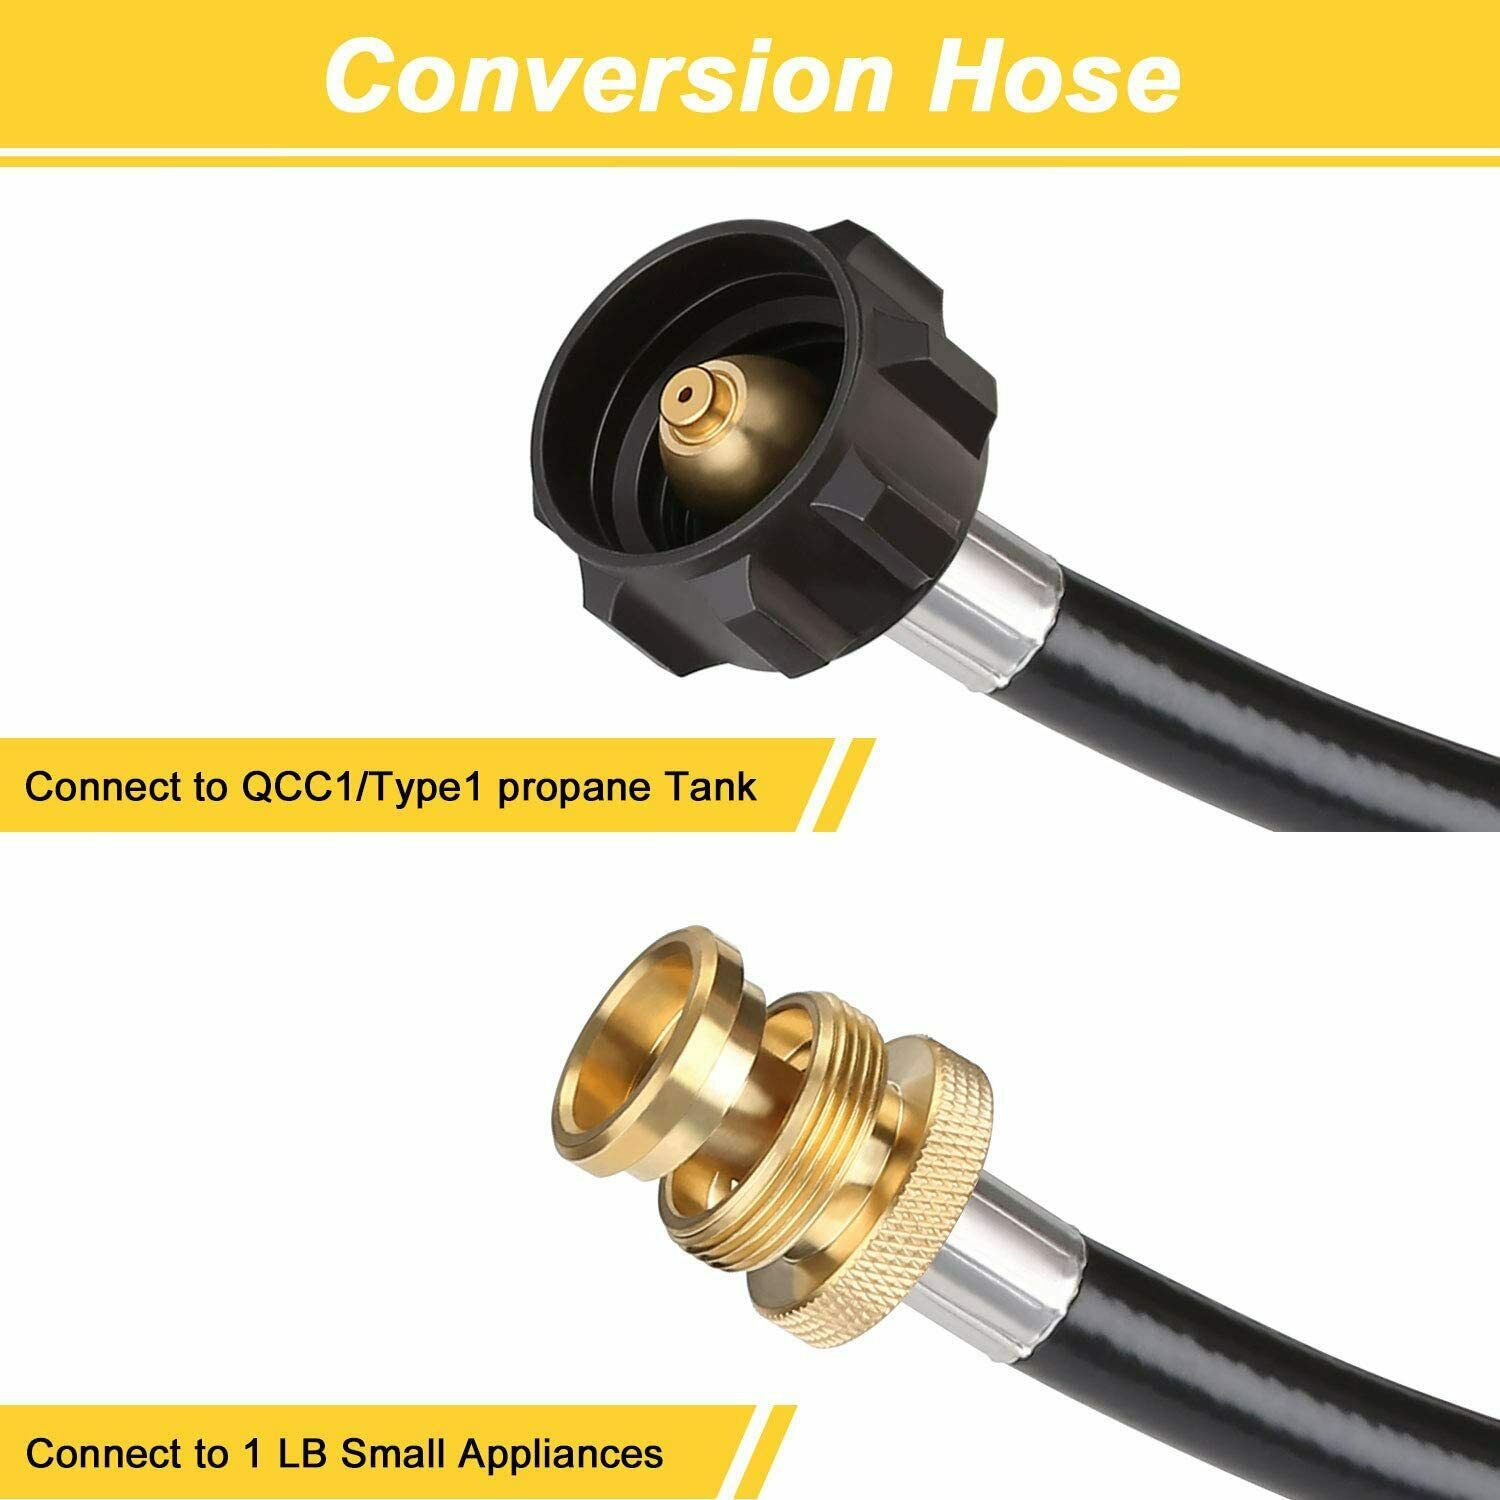 WADEO 8 Feet Propane Adapter Hose with QCC1/Type1 Tank Connects 1 lb Portable Appliance to 1-20lb Propane Tank for Weber Q Grill, Coleman Grill, Camp Stove and More - image 2 of 7